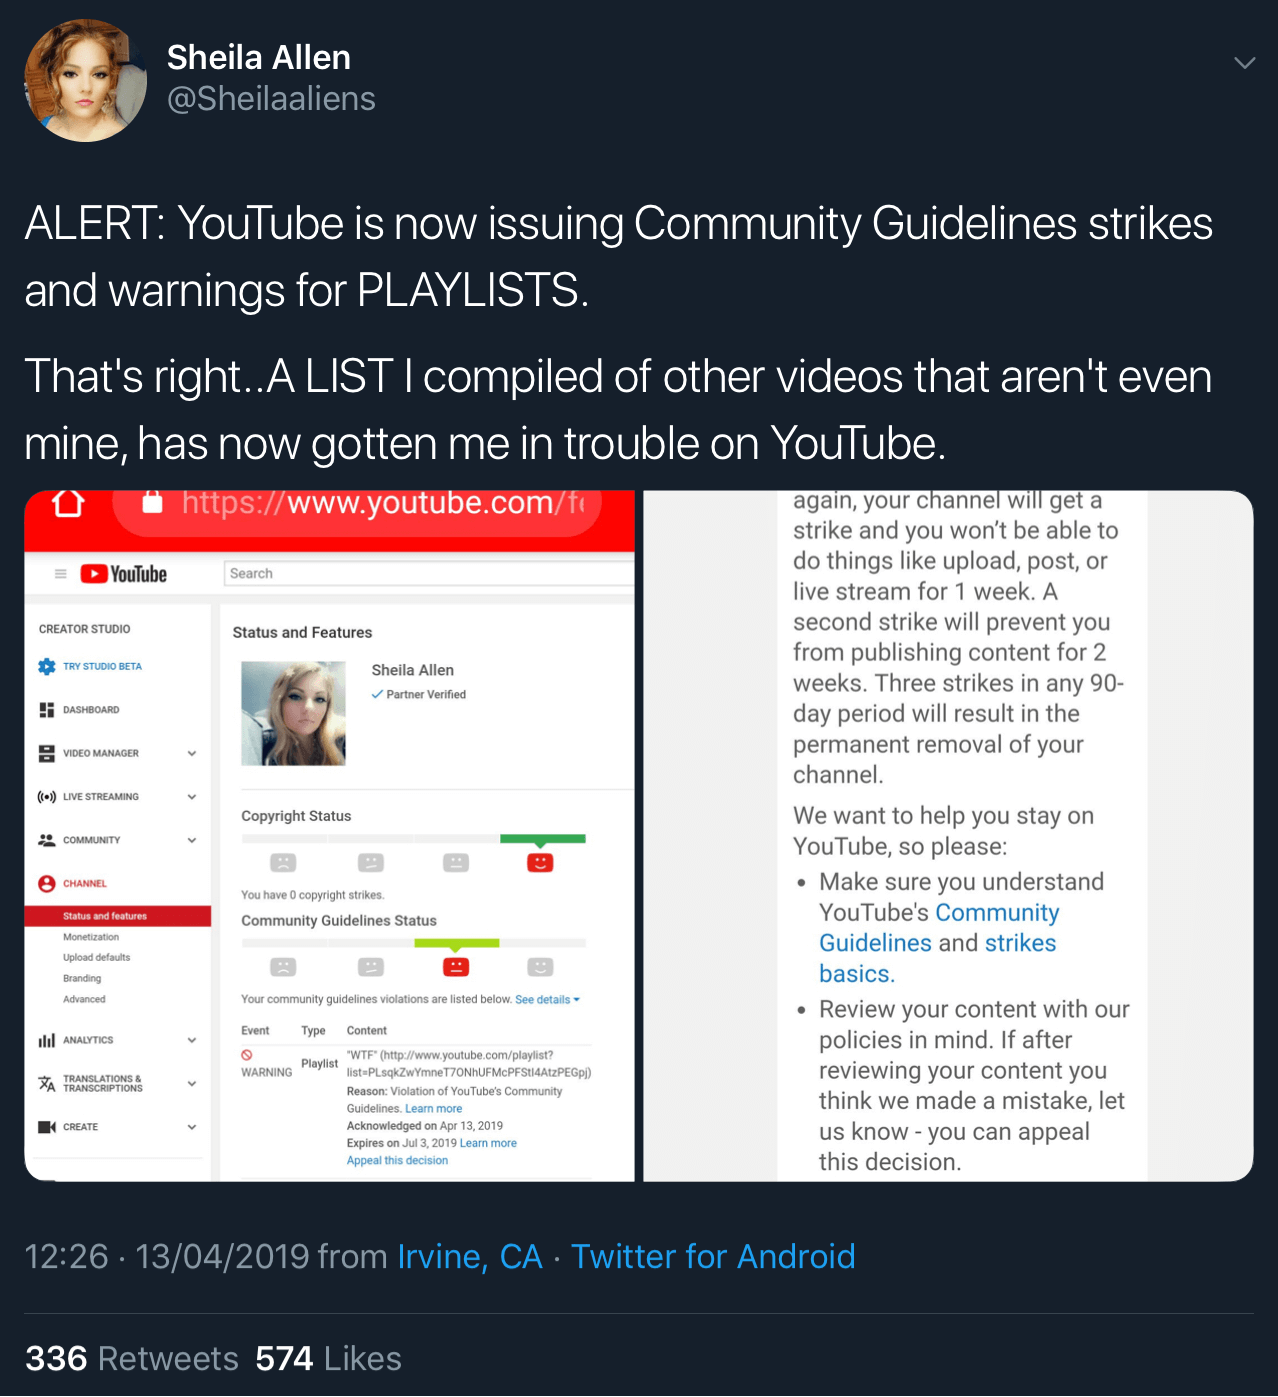 Sheila Allen showing the community guidelines warning against one of her playlists and the email she received from YouTube informing her of this warning.